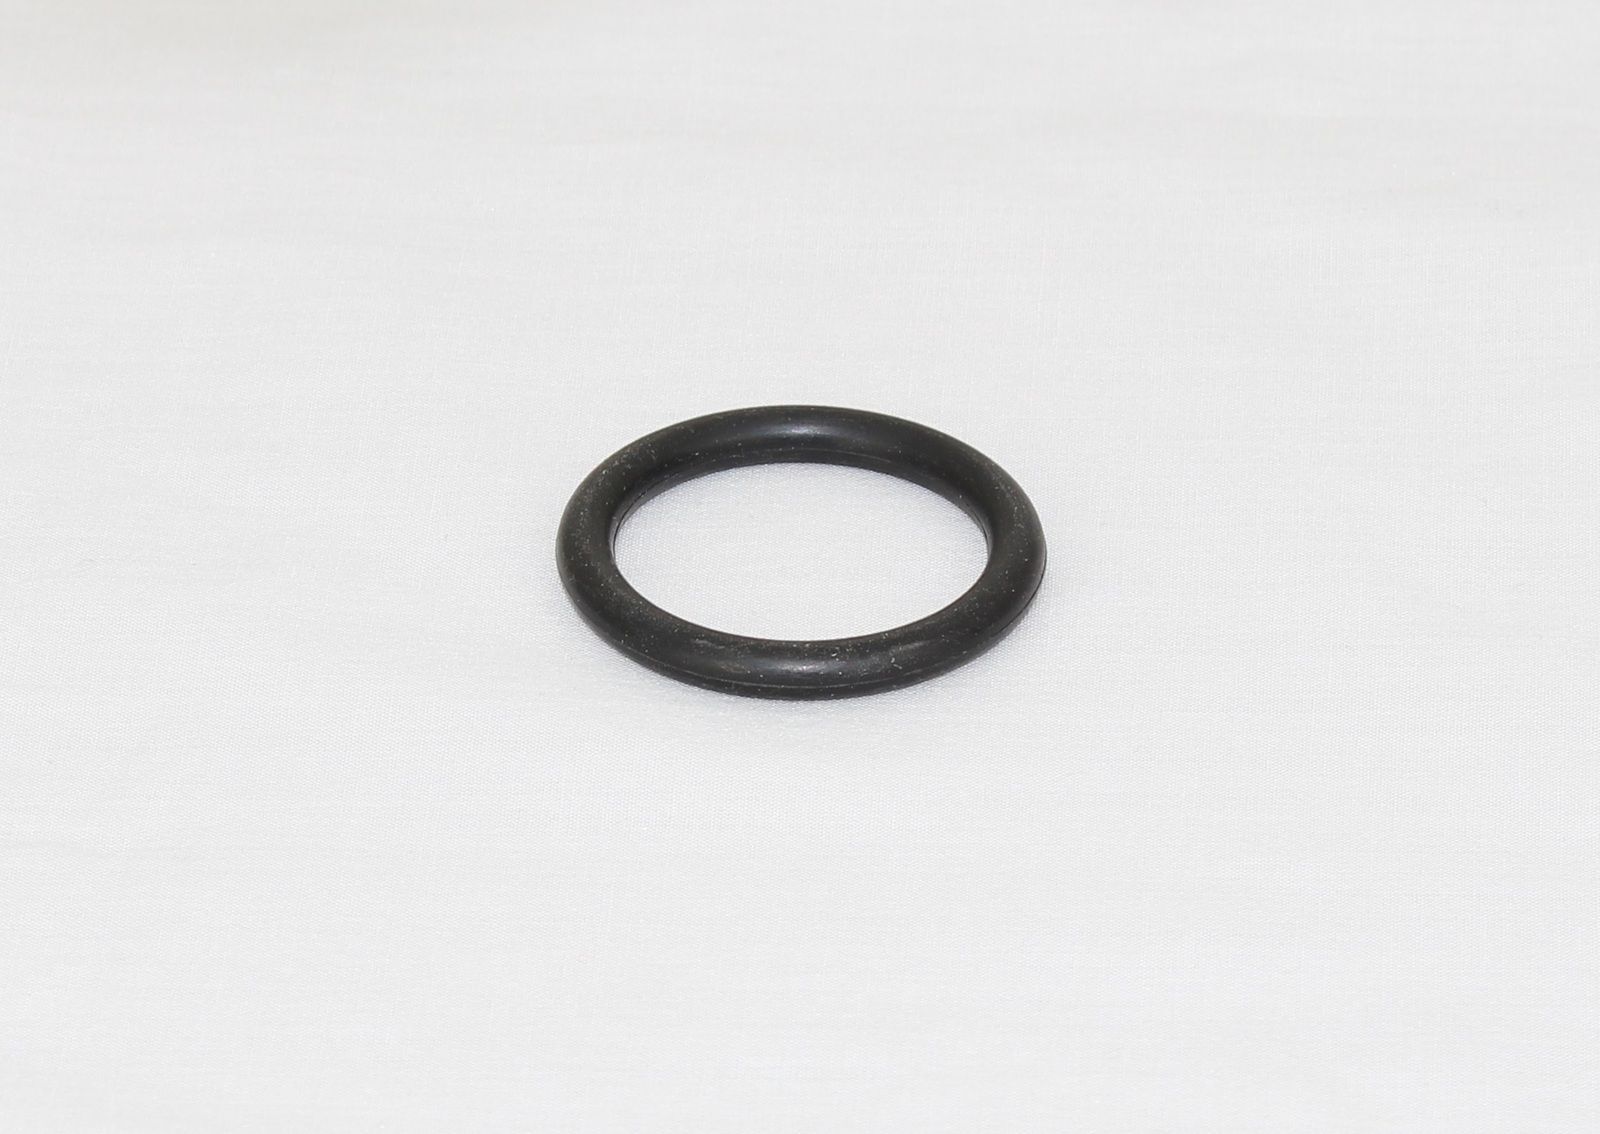 Wyckomar 11-10 Lamp O-ring Seal to suit UV3000 and UV5000